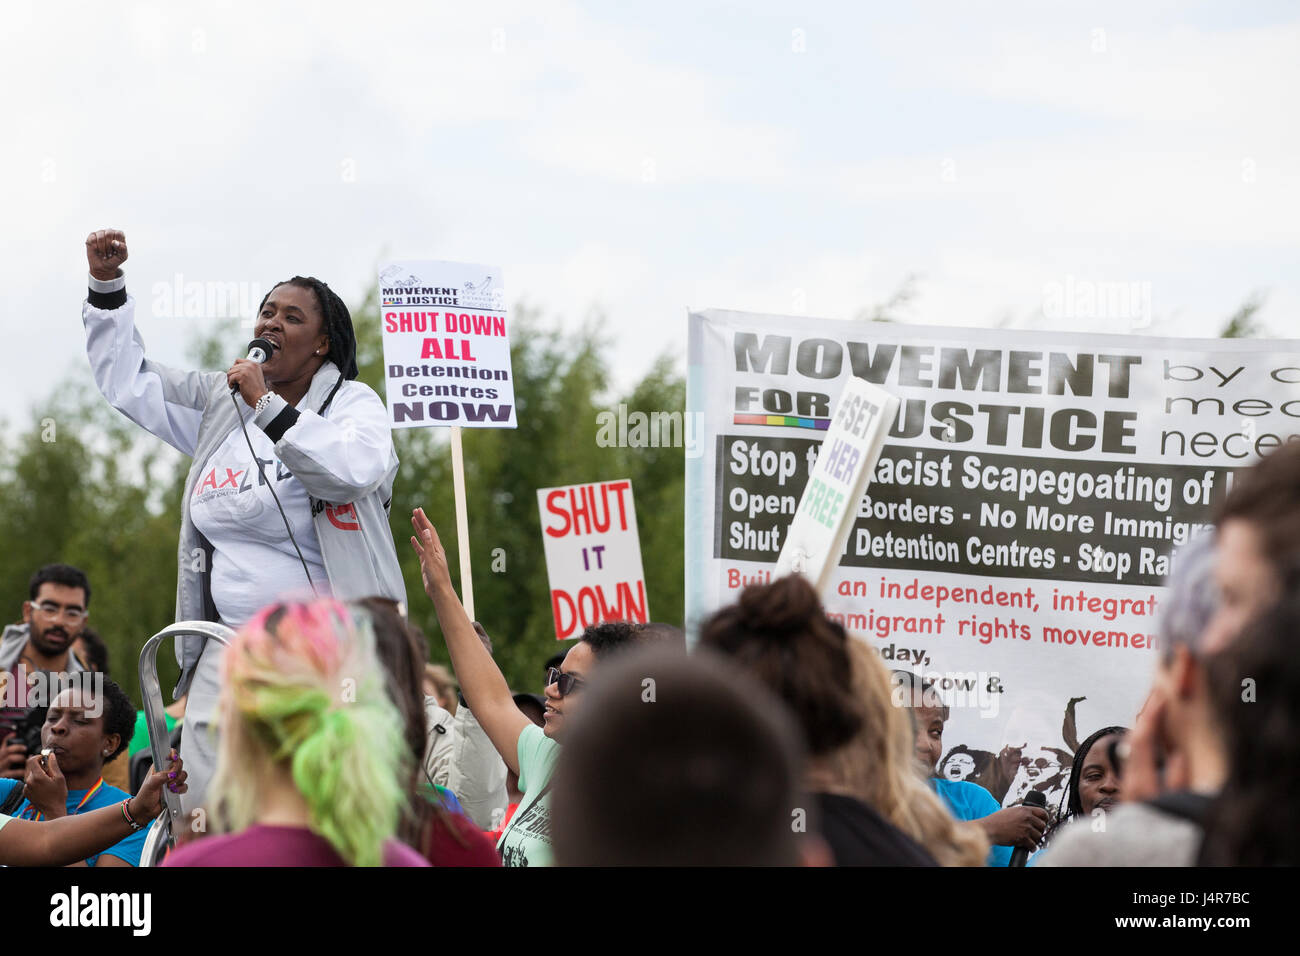 Milton Ernest, UK. 13th May, 2017. Mabel Gawanas, who was detained for almost three years at Yarl's Wood Immigration Removal Centre, addresses over a thousand campaigners against immigration detention attending a protest organised by Movement For Justice By Any Means Necessary outside the detention centre. Campaigners, including former detainees, called for all immigration detention centres to be closed. Credit: Mark Kerrison/Alamy Live News Stock Photo